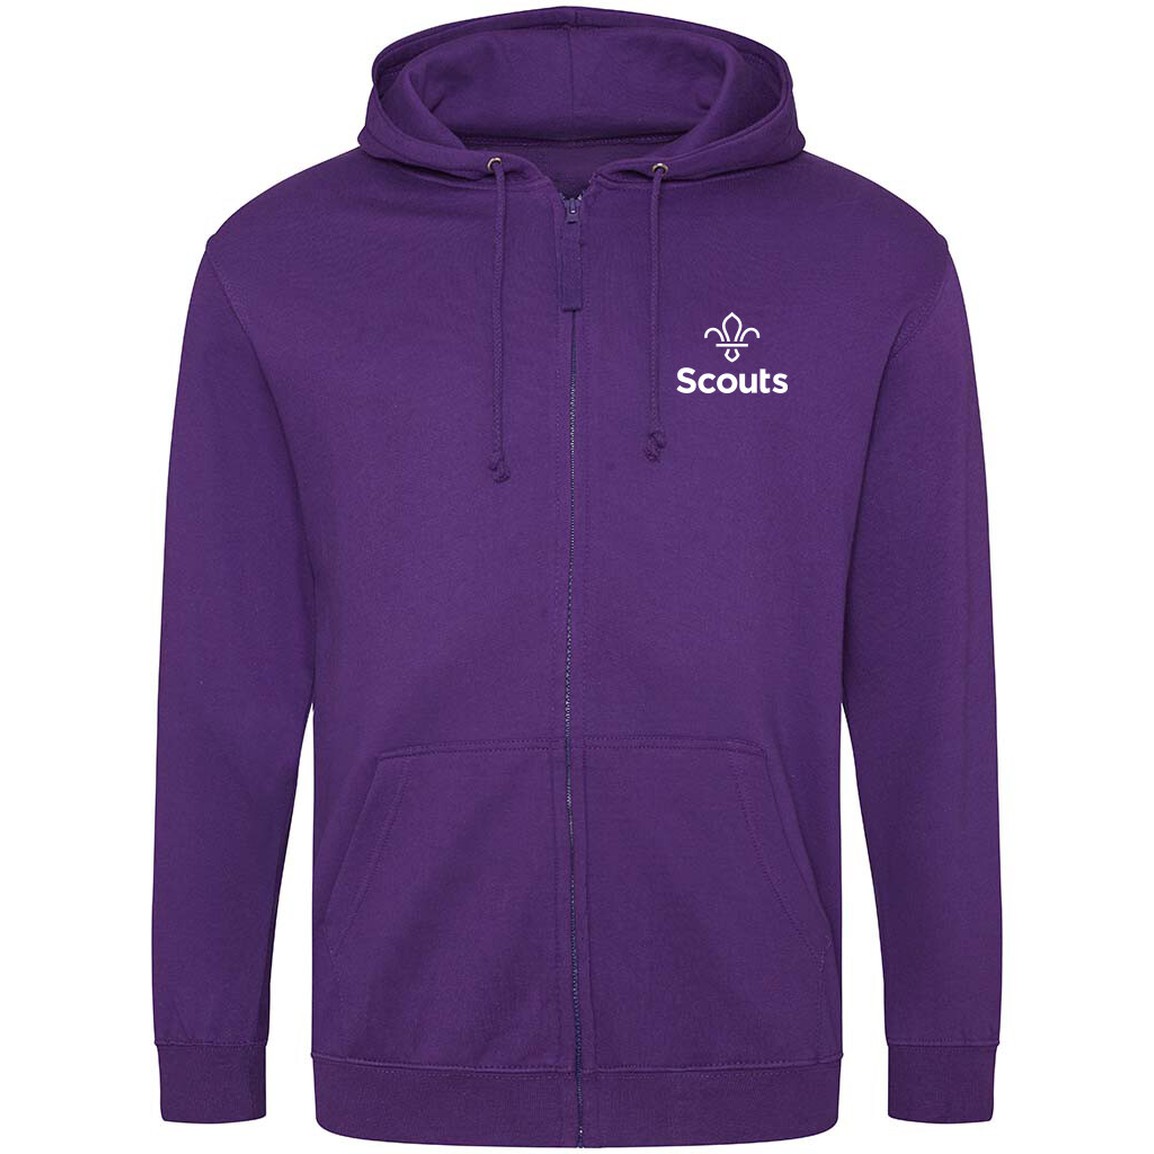 Scouts Group Clothing - Personalised Printed Zipped Hoodie Adult ...